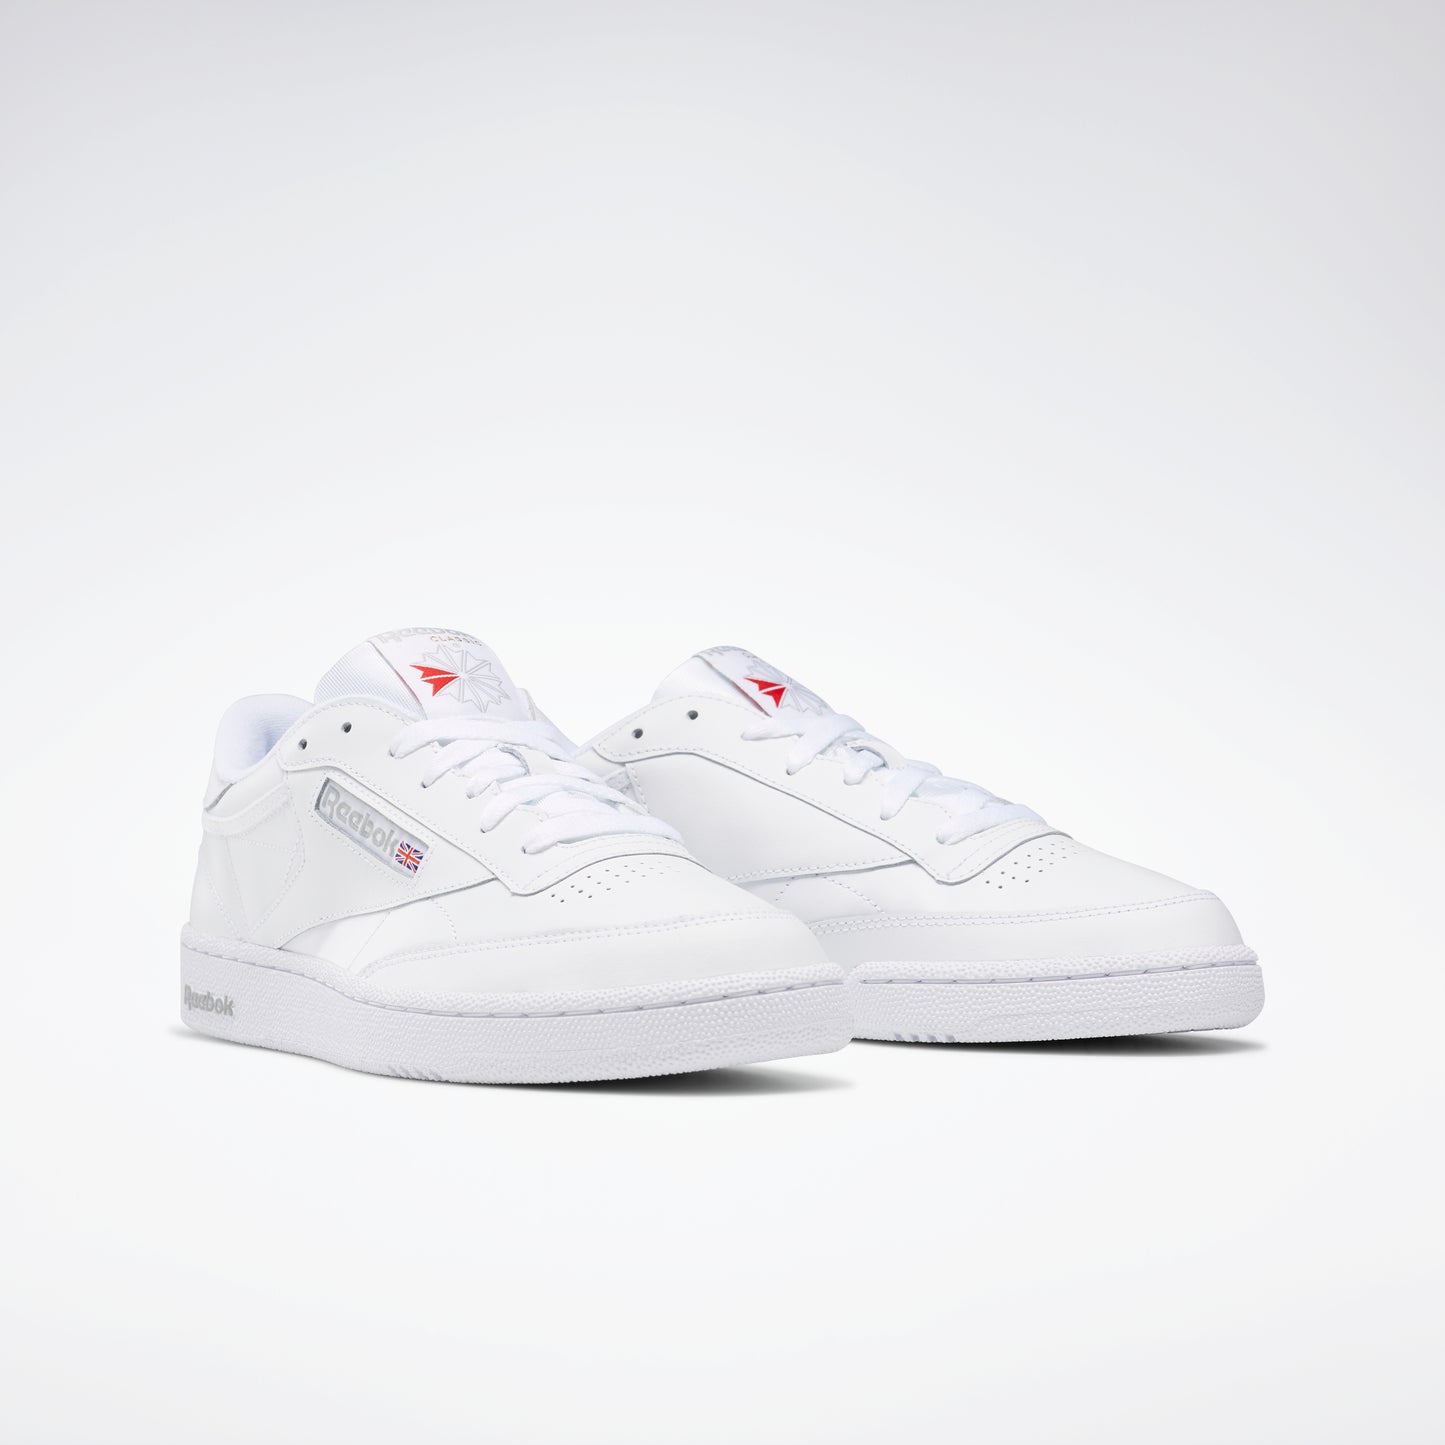 Club C 85 Shoes Int-White/Sheer Grey